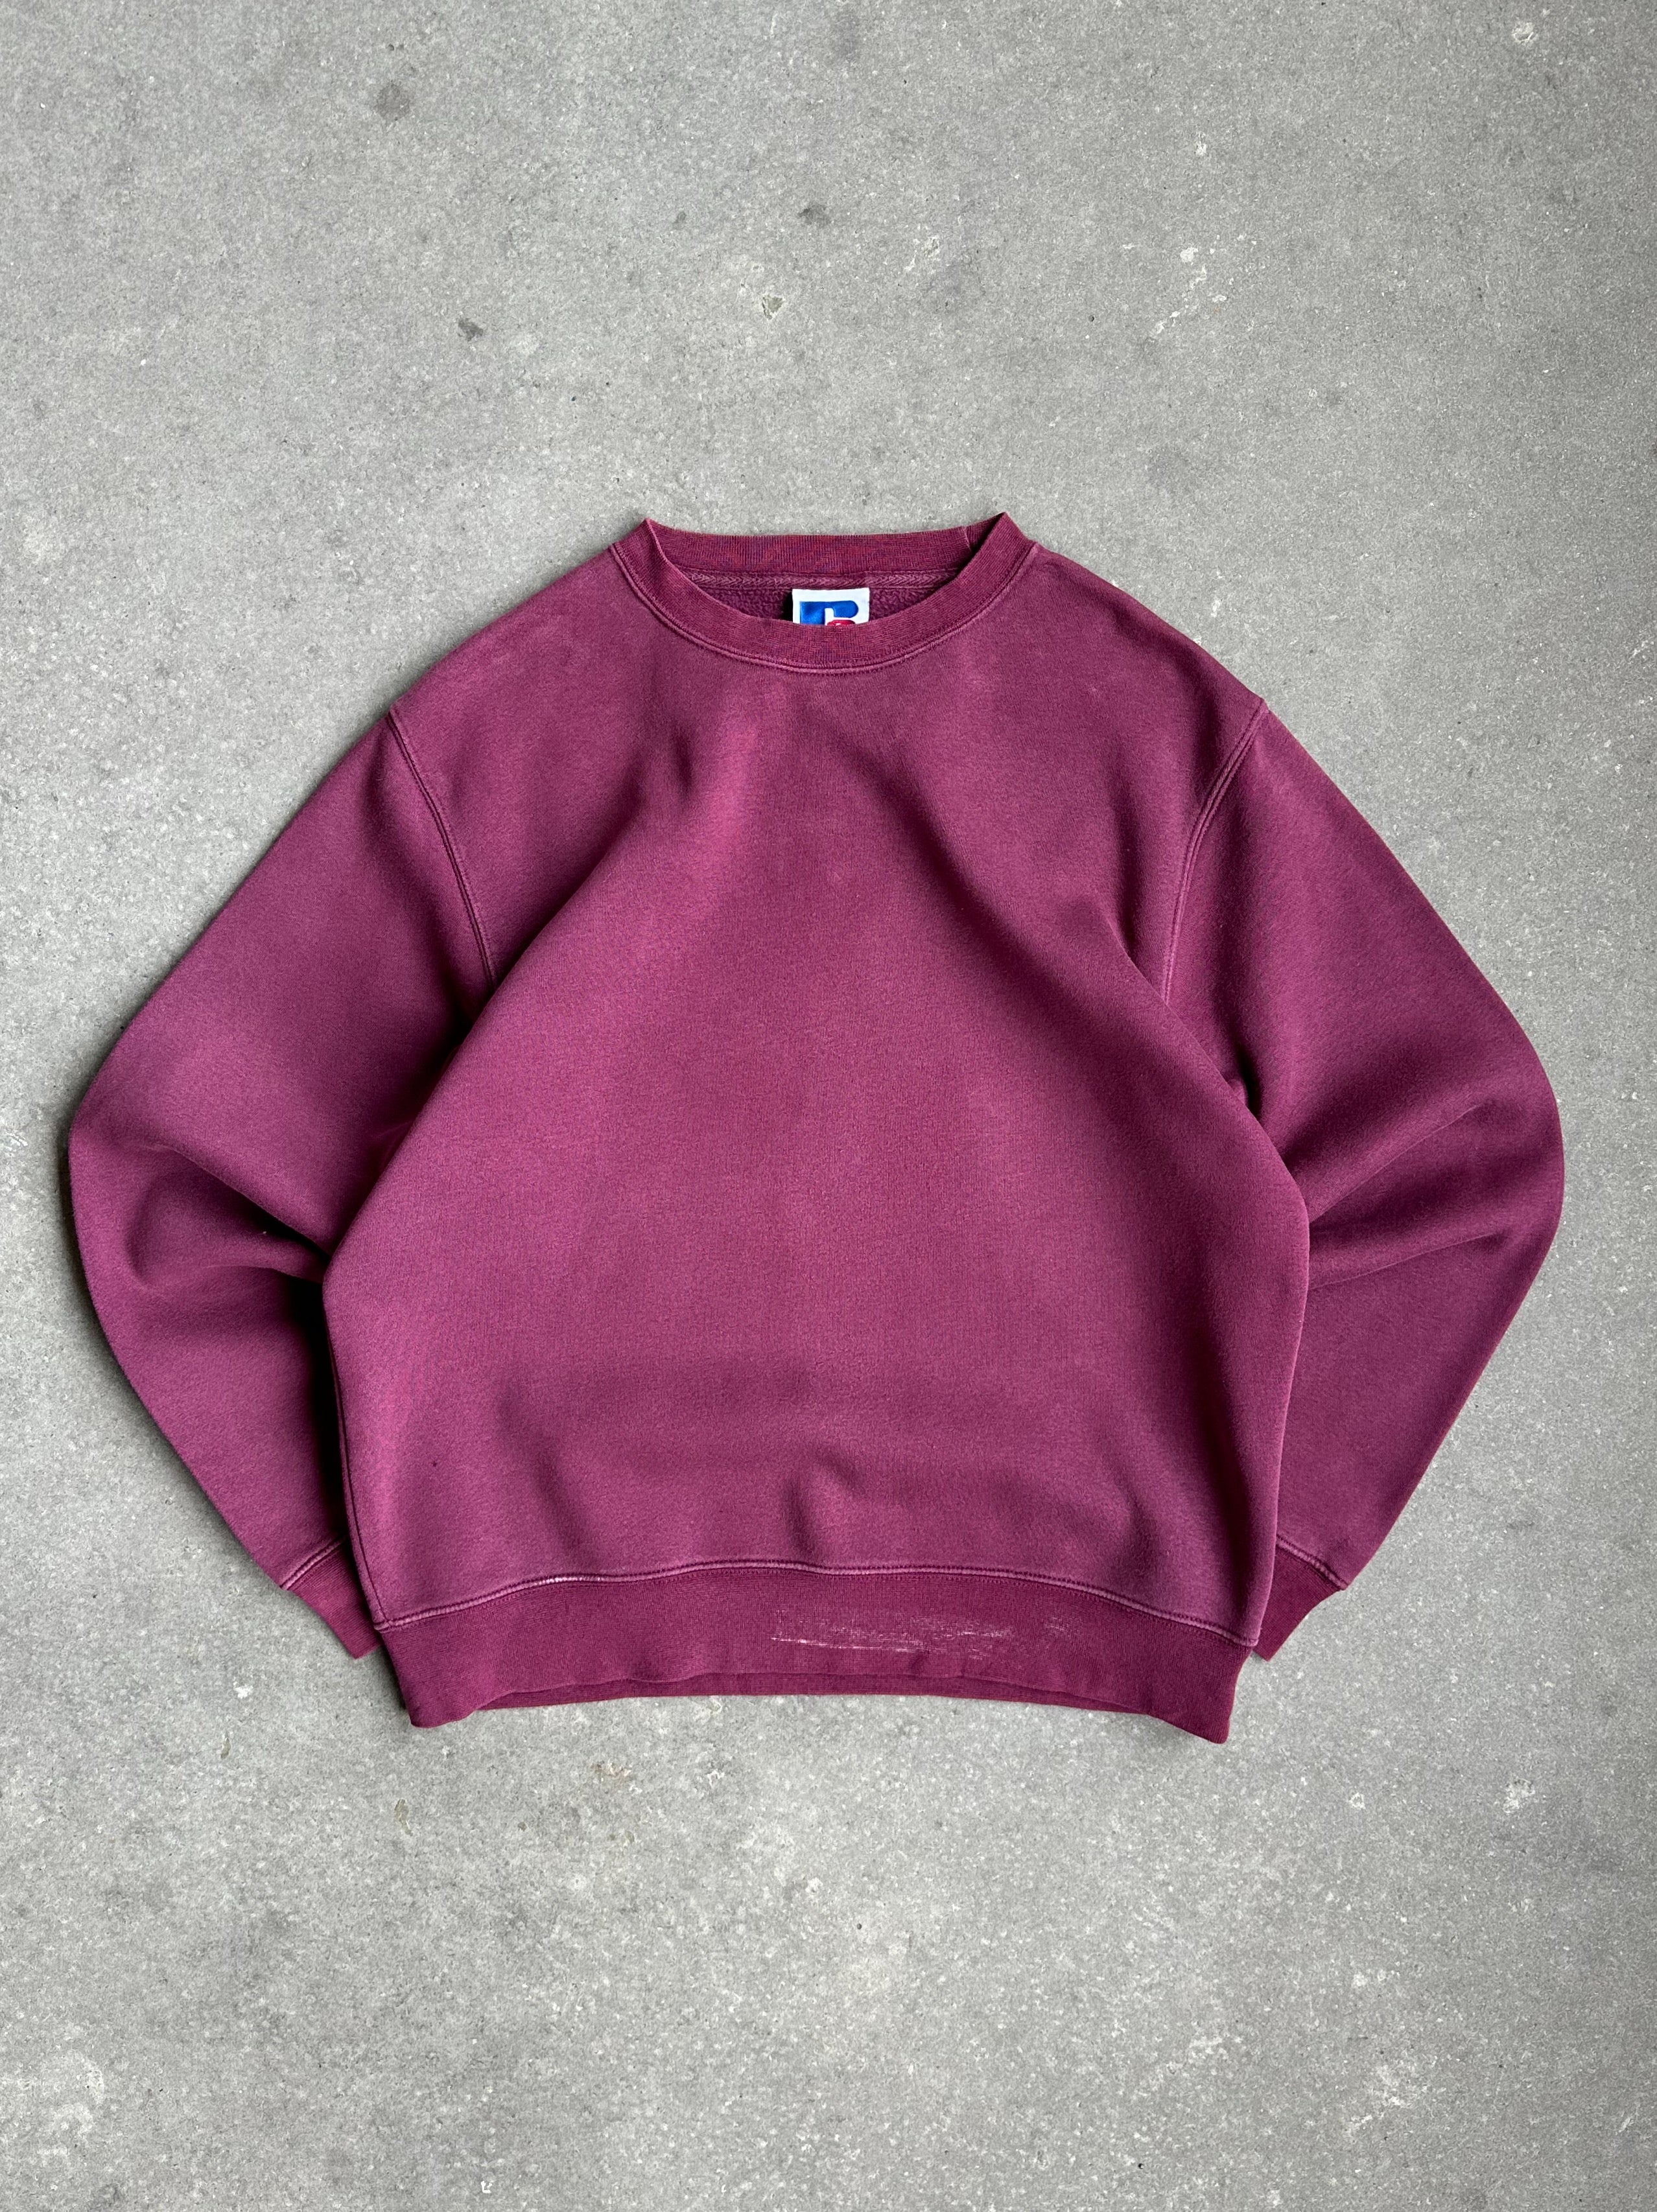 Vintage Russell Blank Crewneck - Small